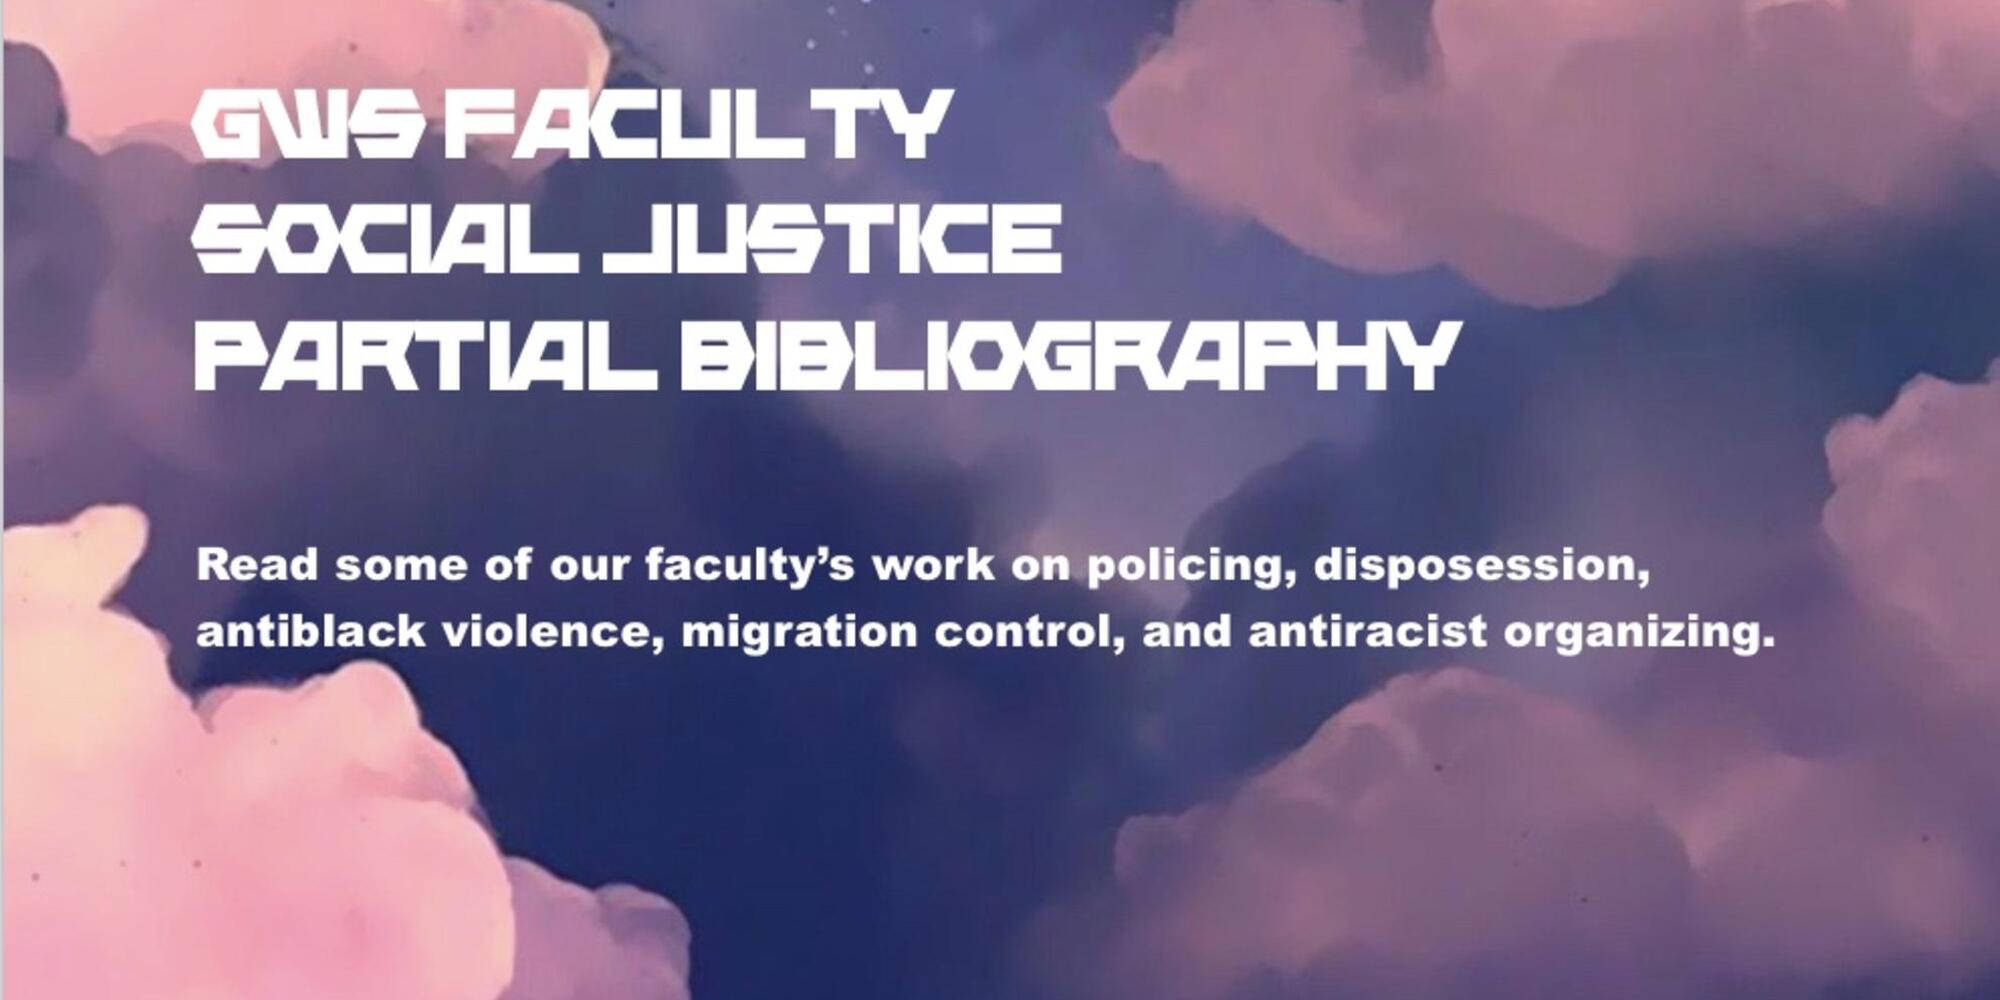 A background of pink and purple clouds, with text reading, "GWS Faculty Social Justice Partial Bibliography," and "Read some of our faculty's work on policing, disposession, antiblack violence, migration control, and antiracist organizing."